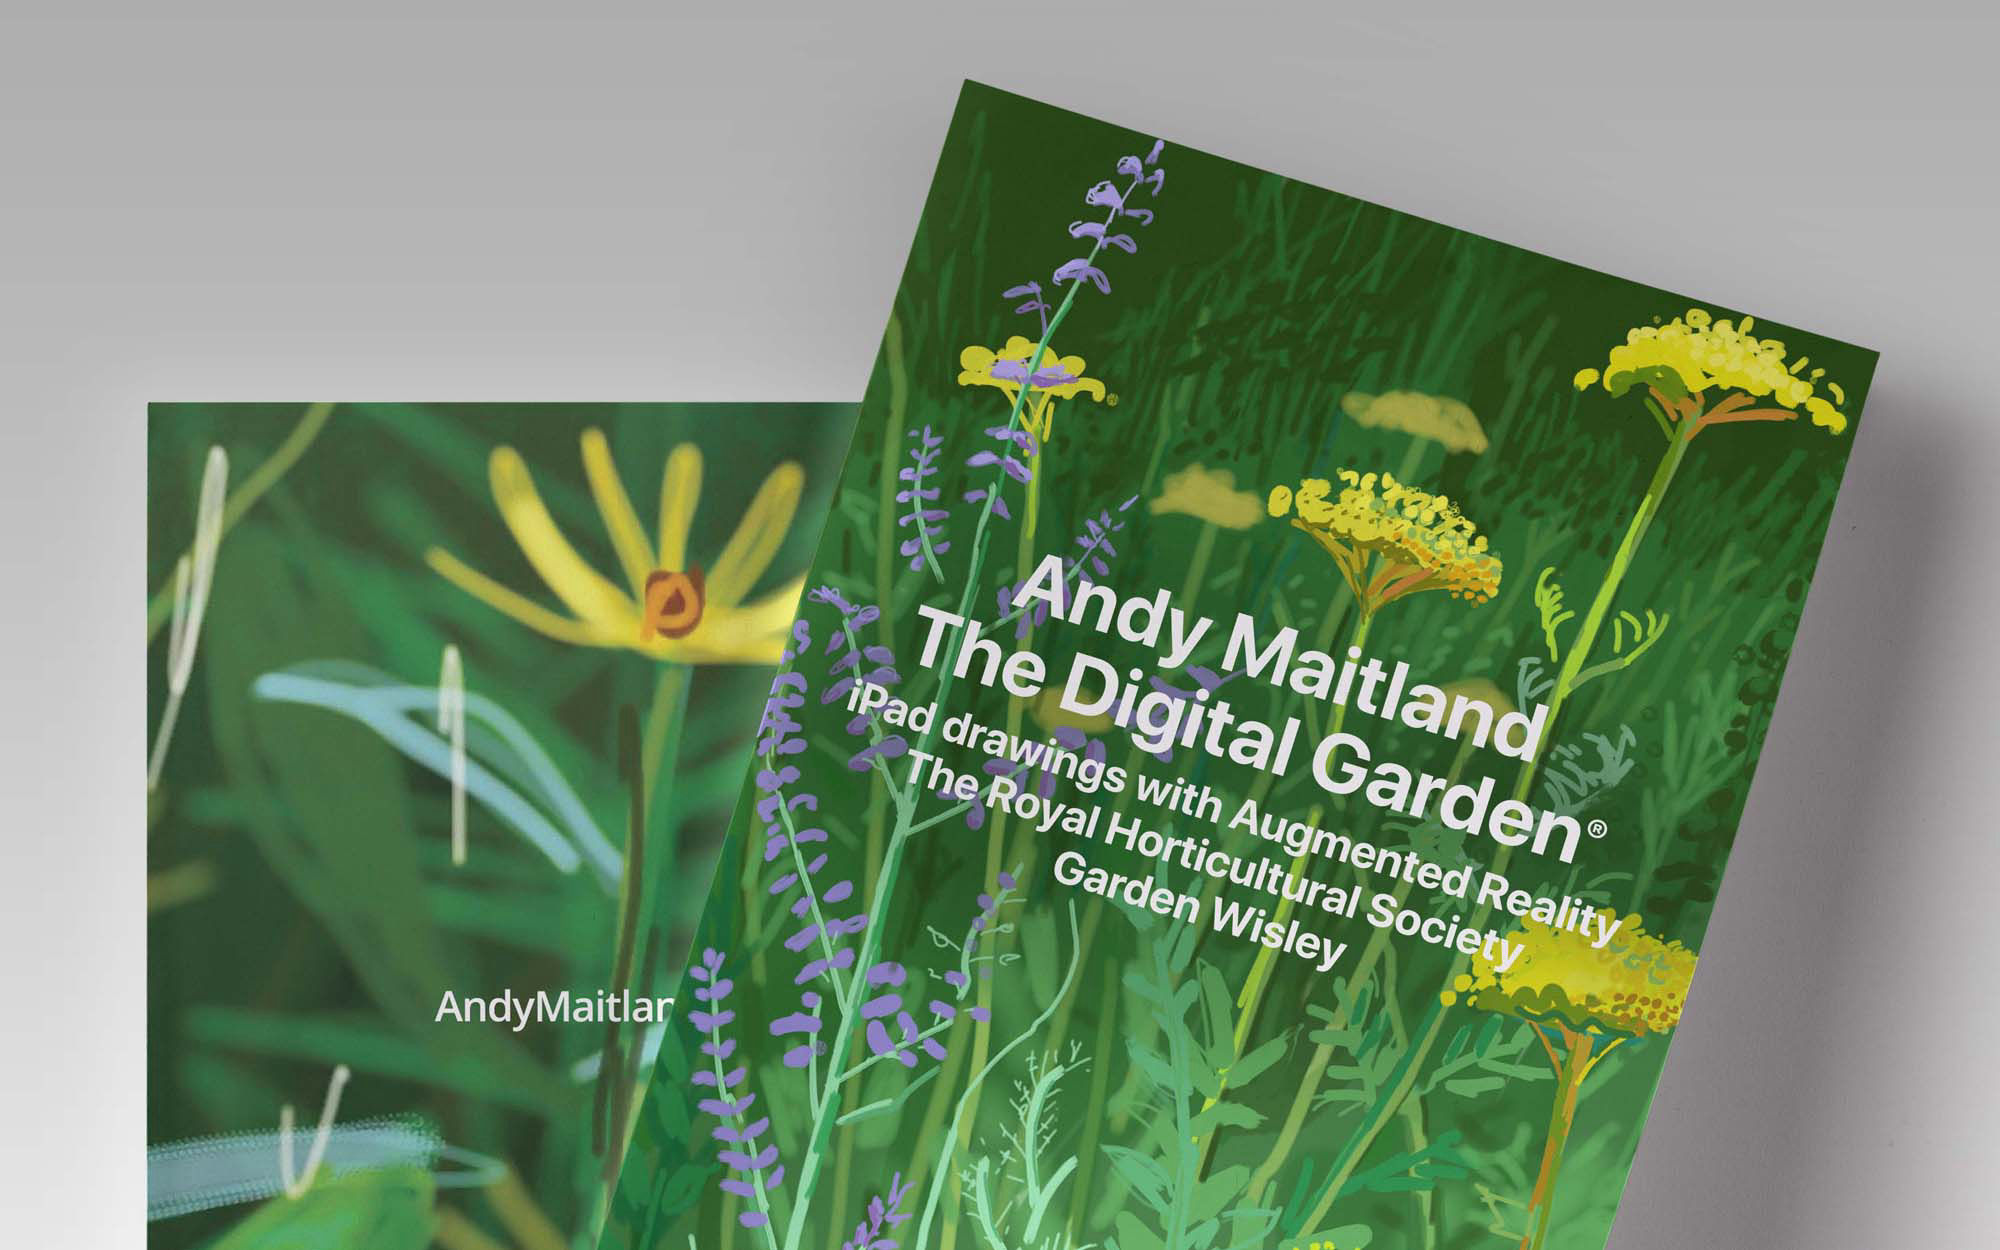 Publication - ‘The Digital Garden® 2018, iPad drawings with Augmented Reality at the Royal Horticultural Society' installation.